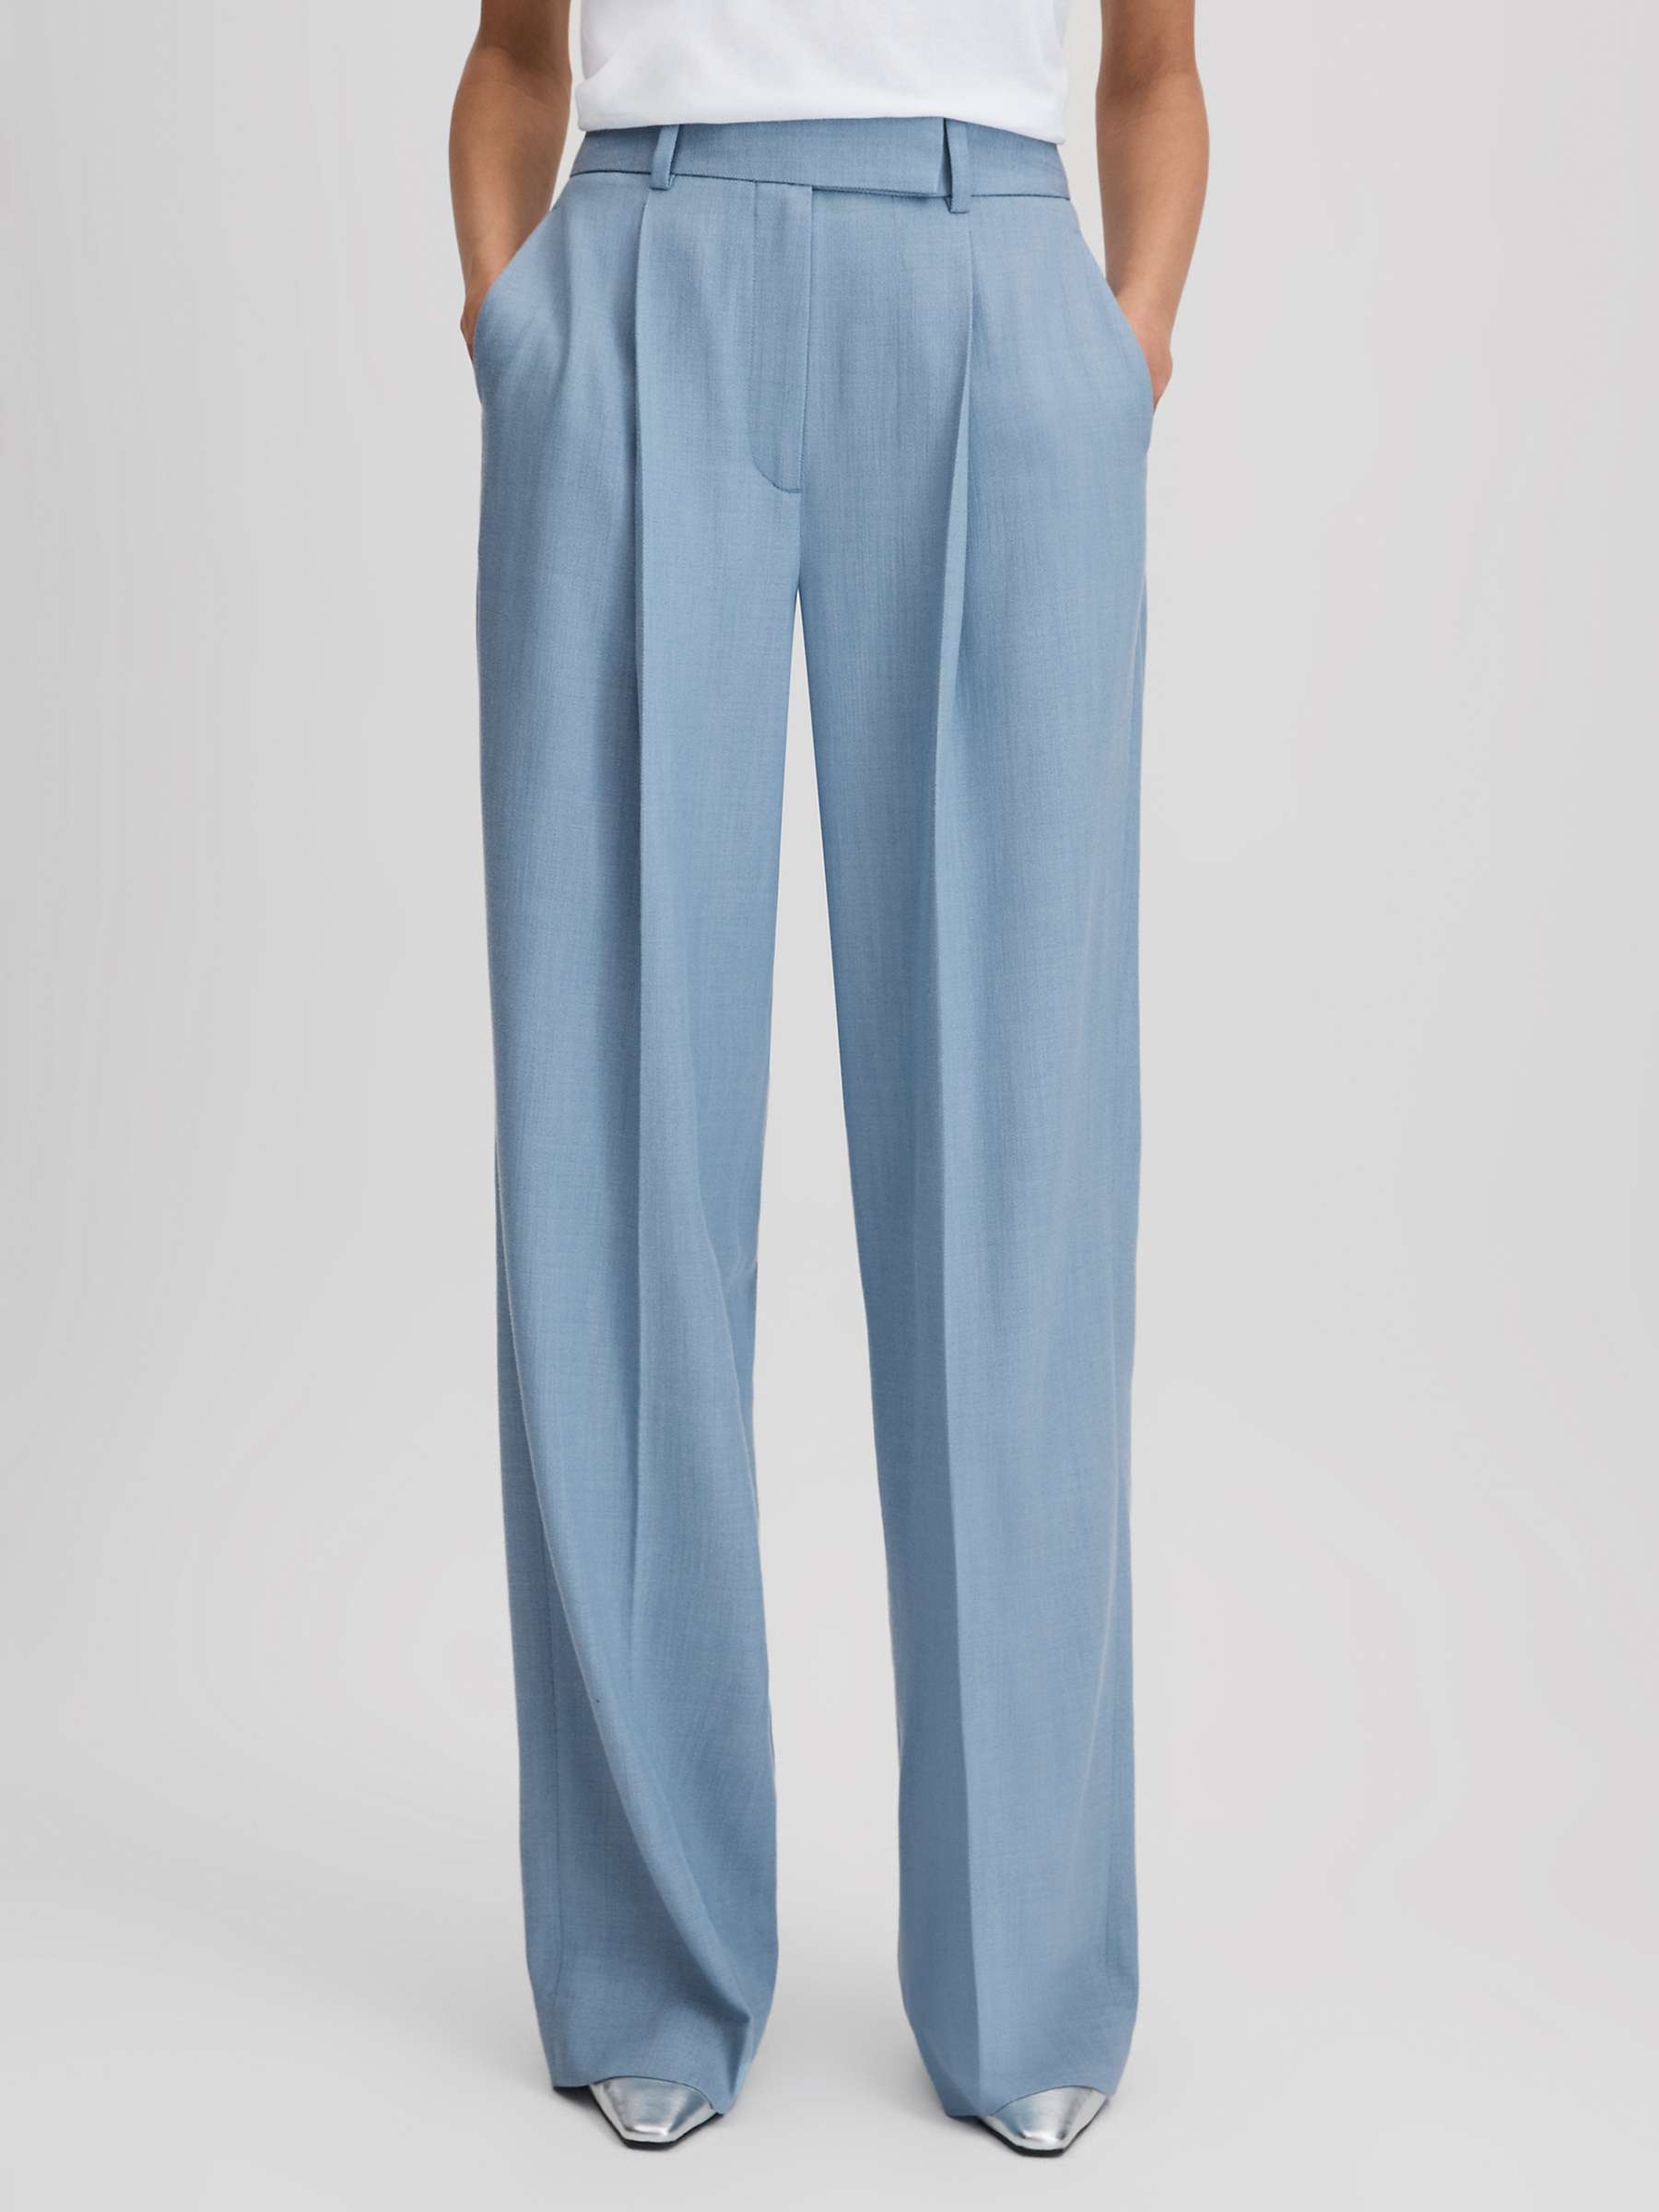 Buy Reiss Petite June Wide Leg Tailored Trousers, Blue Online at johnlewis.com